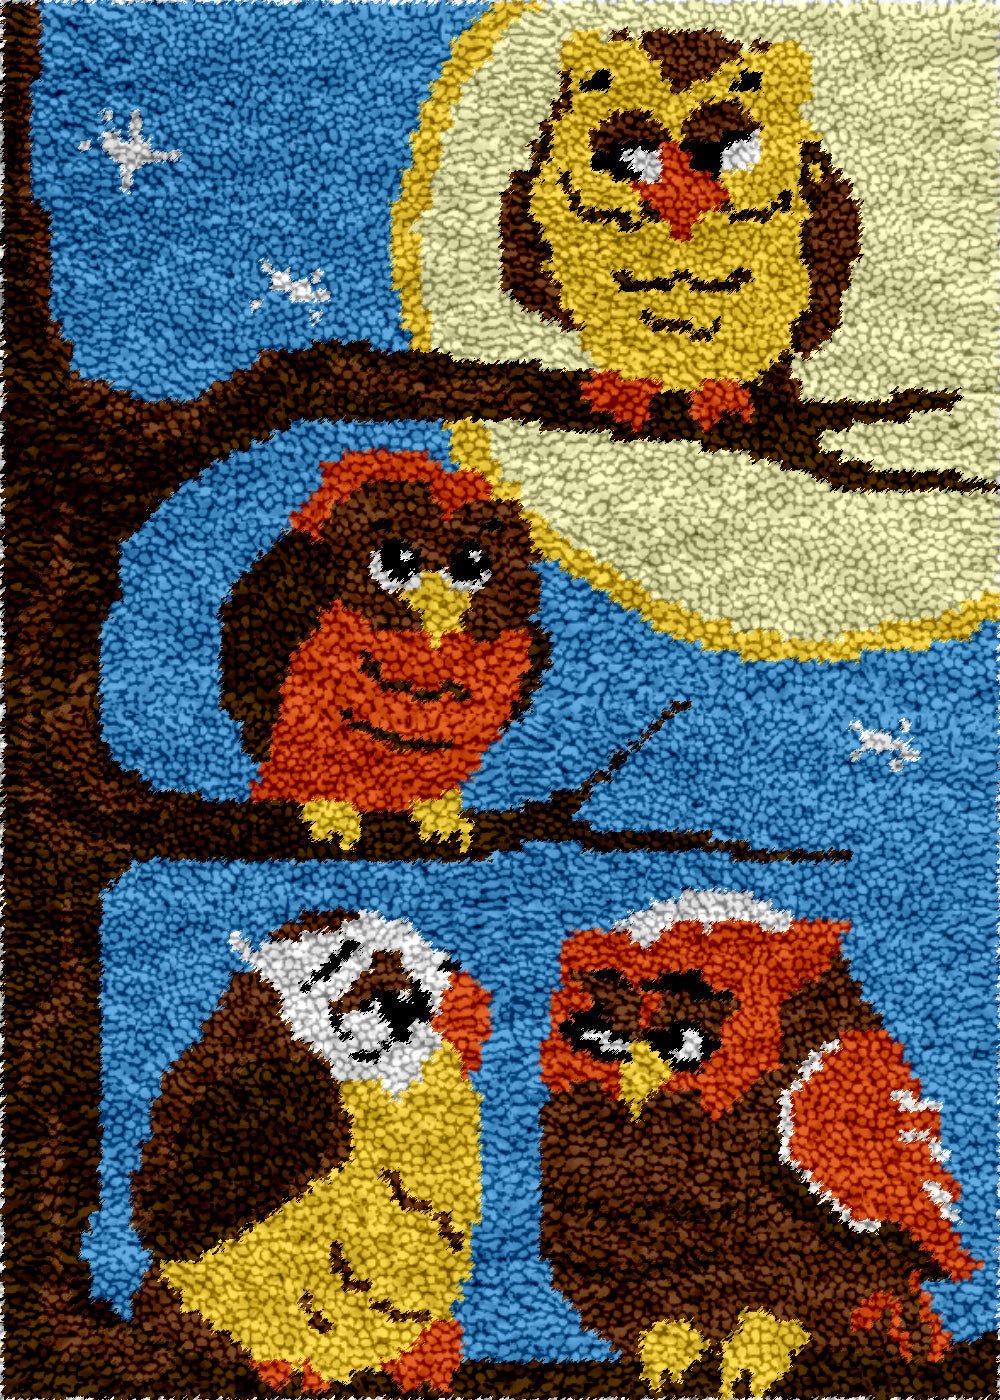 Meeting of Nocturnals - Latch Hook Rug Kit - Latch Hook Crafts